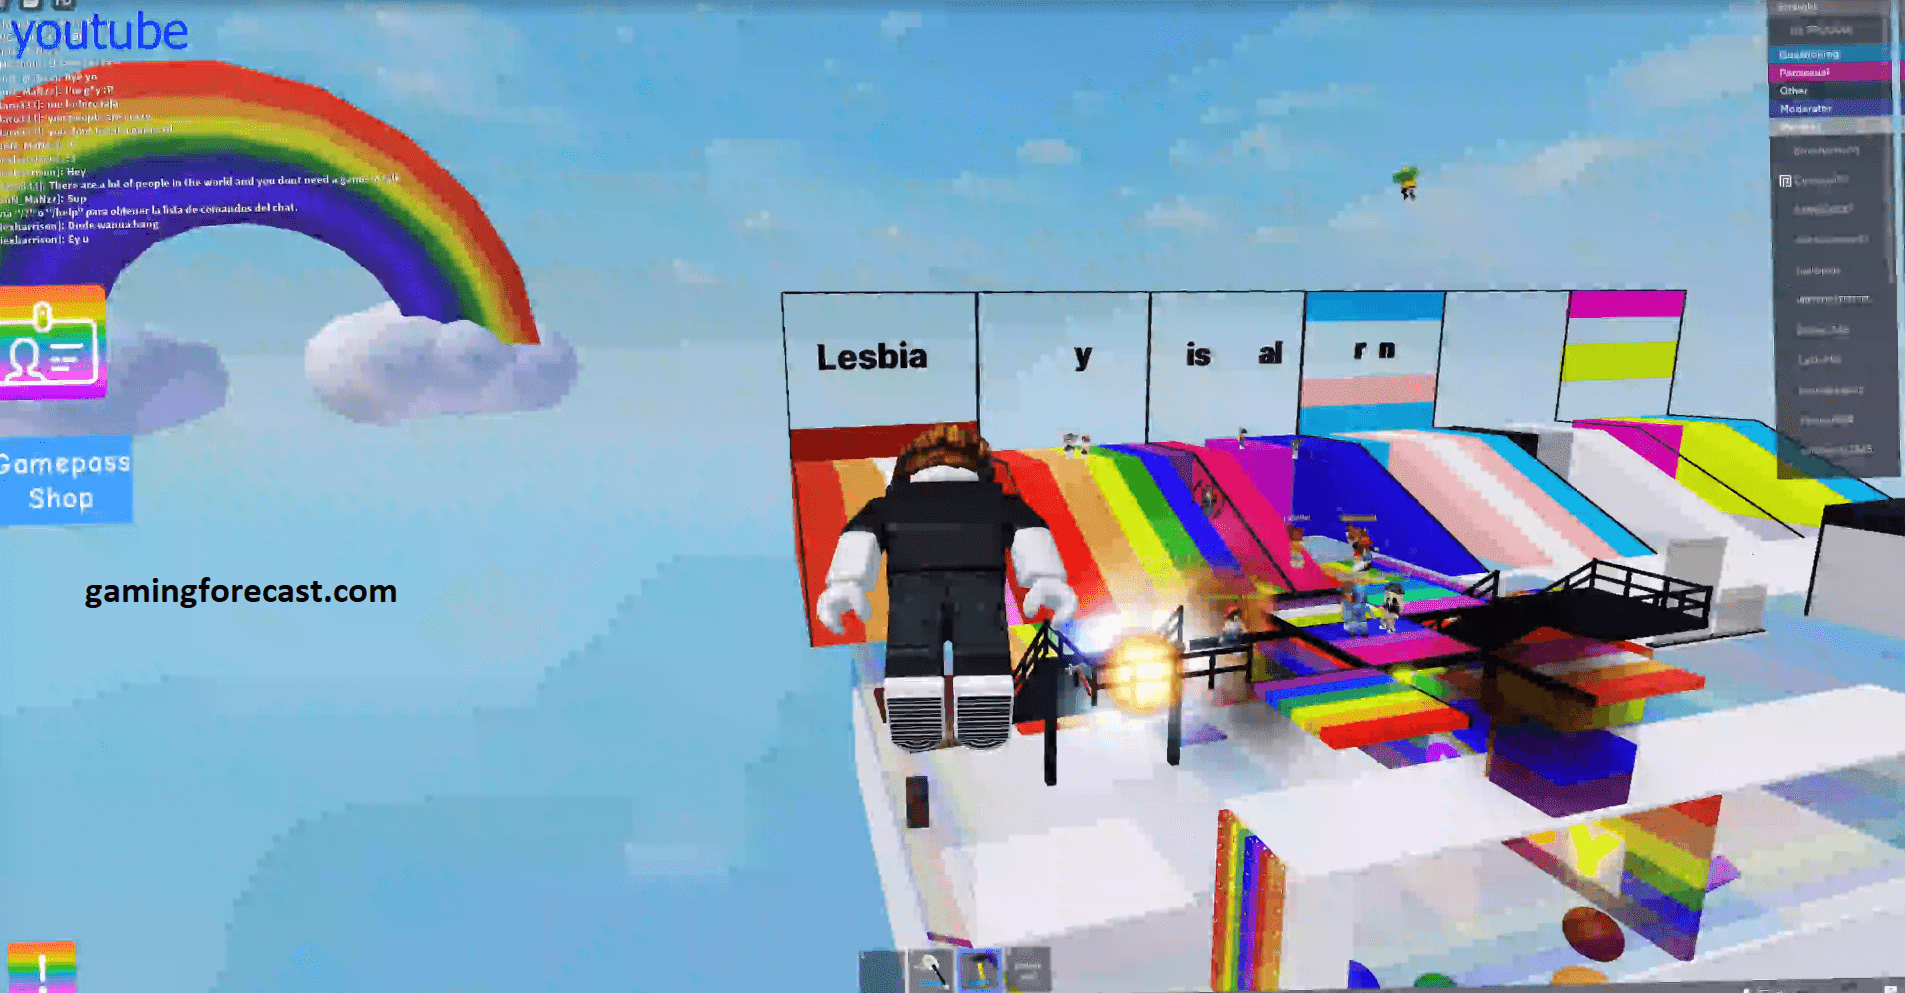 Roblox Hack Download Pc Destroy Lobby Fly Aimbot Scripts 2021 Gaming Forecast Download Free Online Game Hacks - roblox hacks for phone